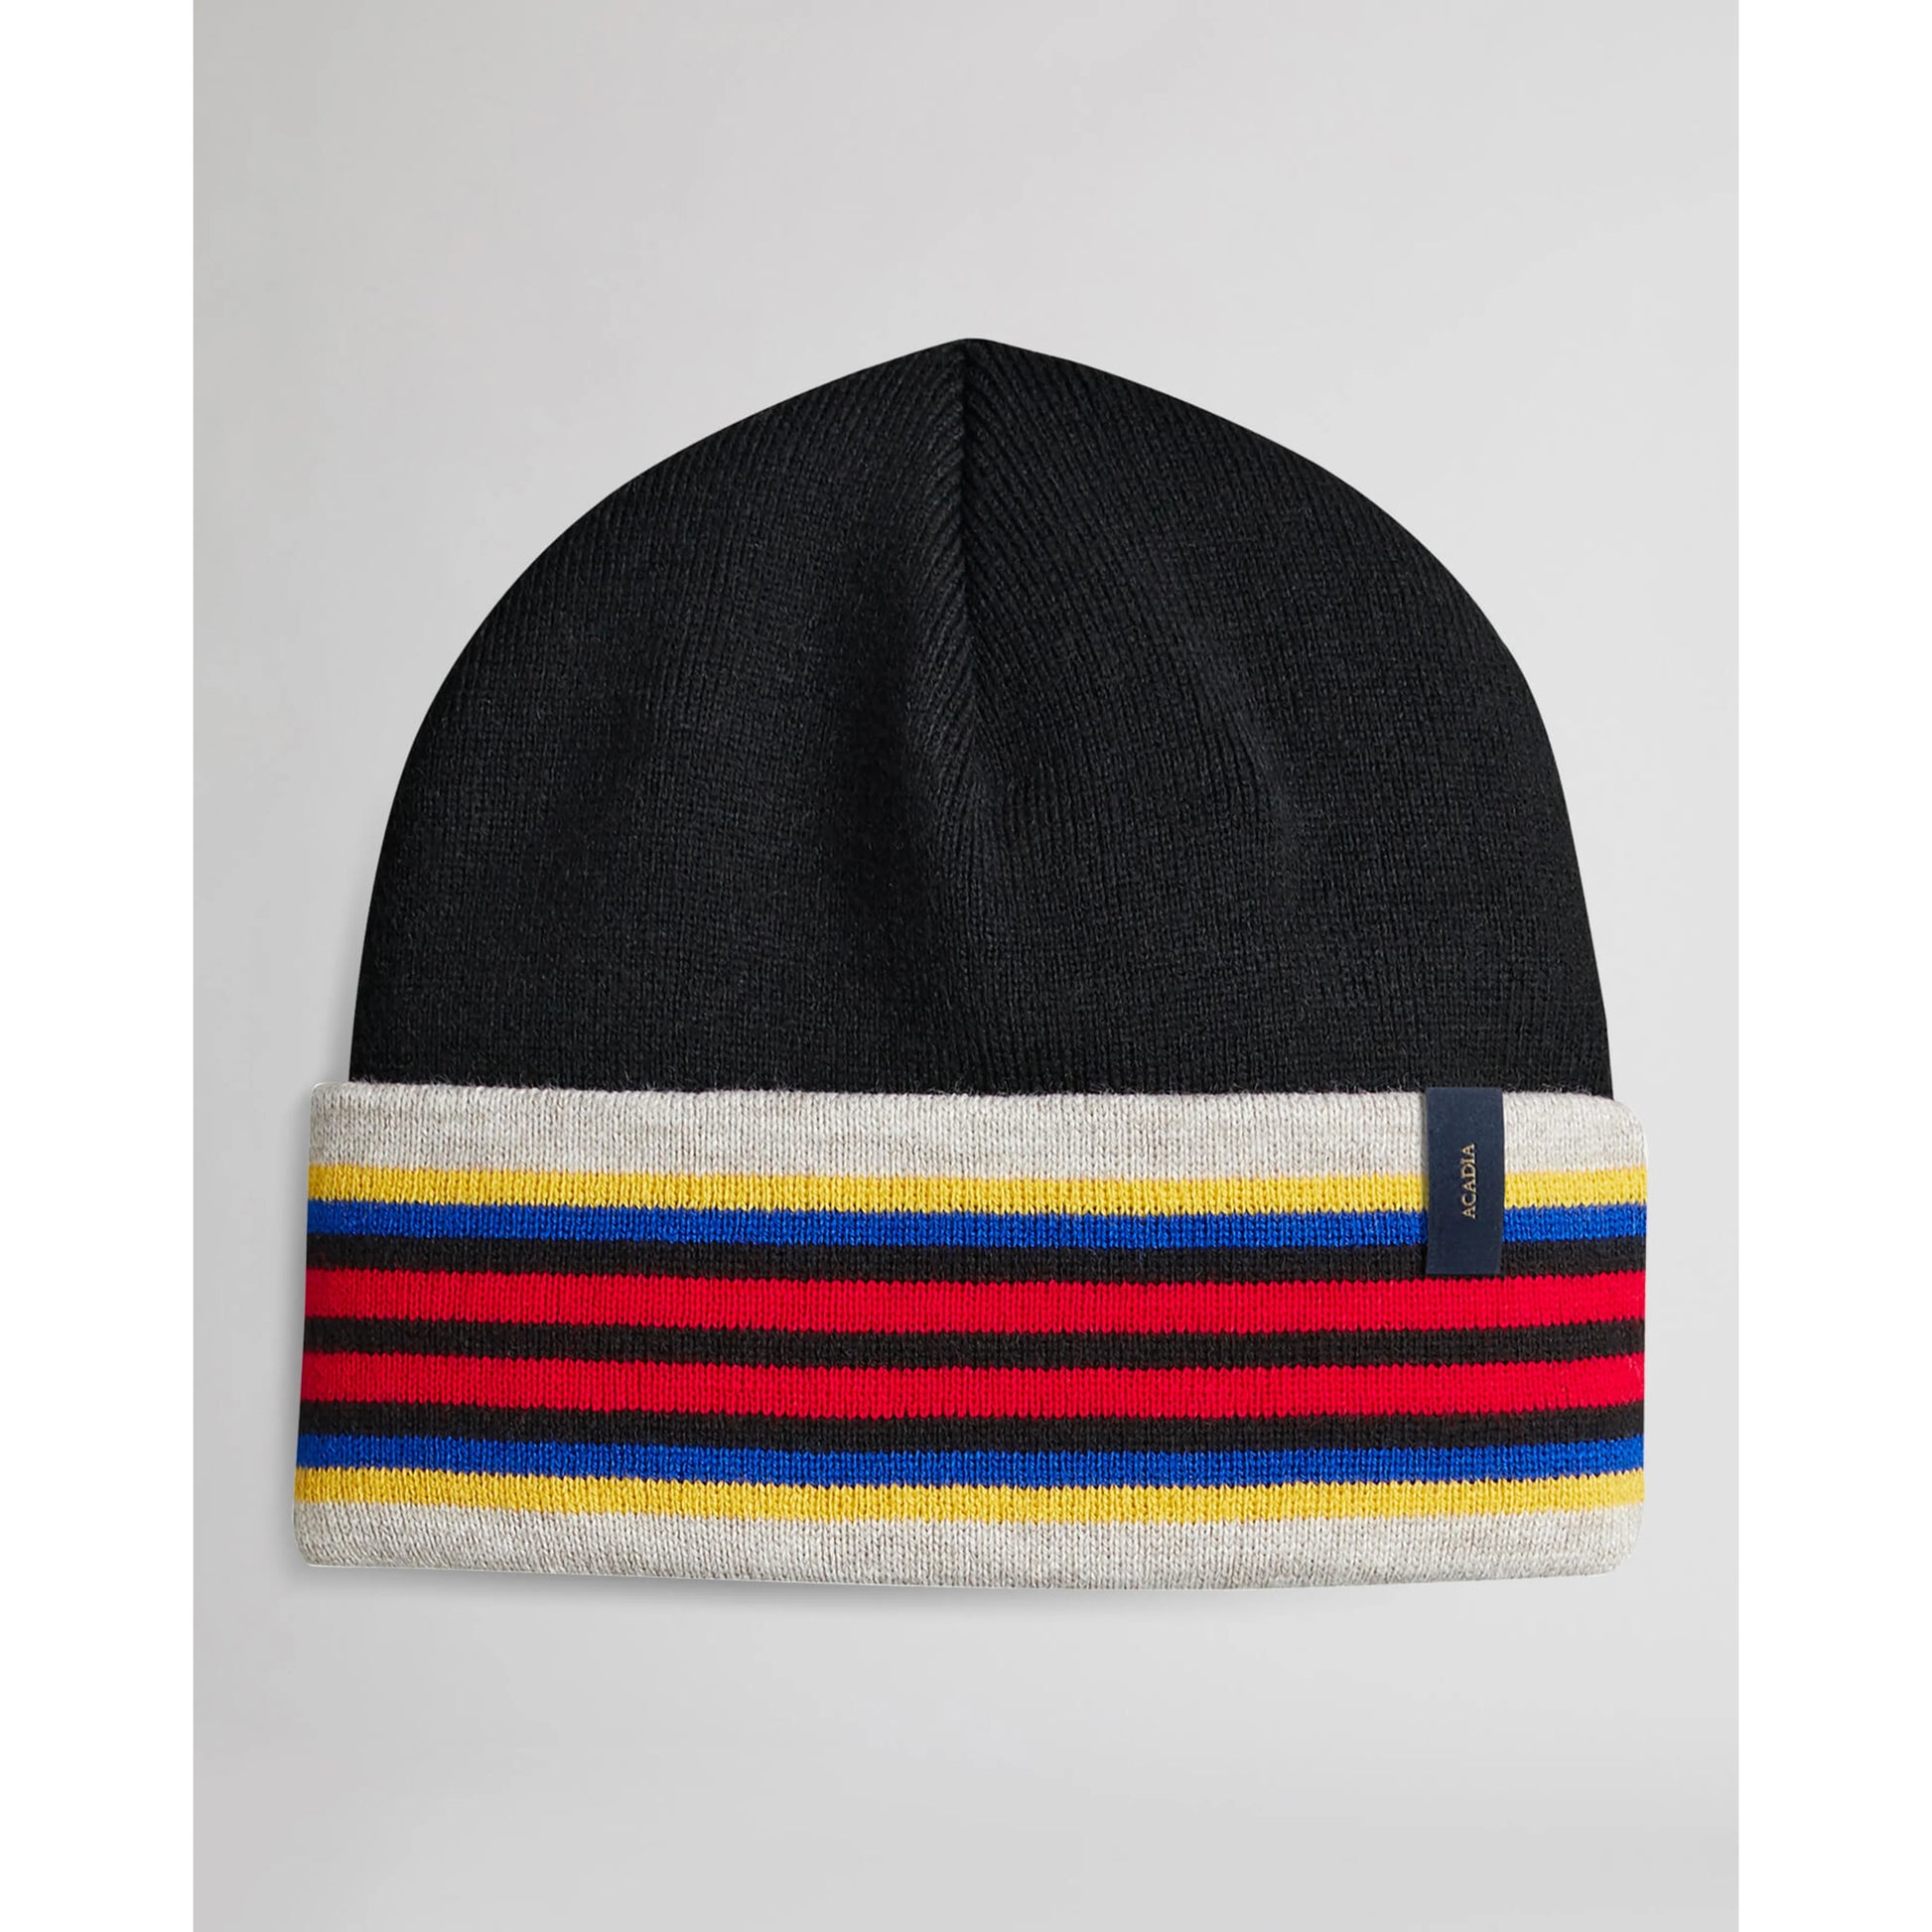 Beanie Hat, soft stretchy ribbed knit, black with red/blue/yellow/black/white stripes